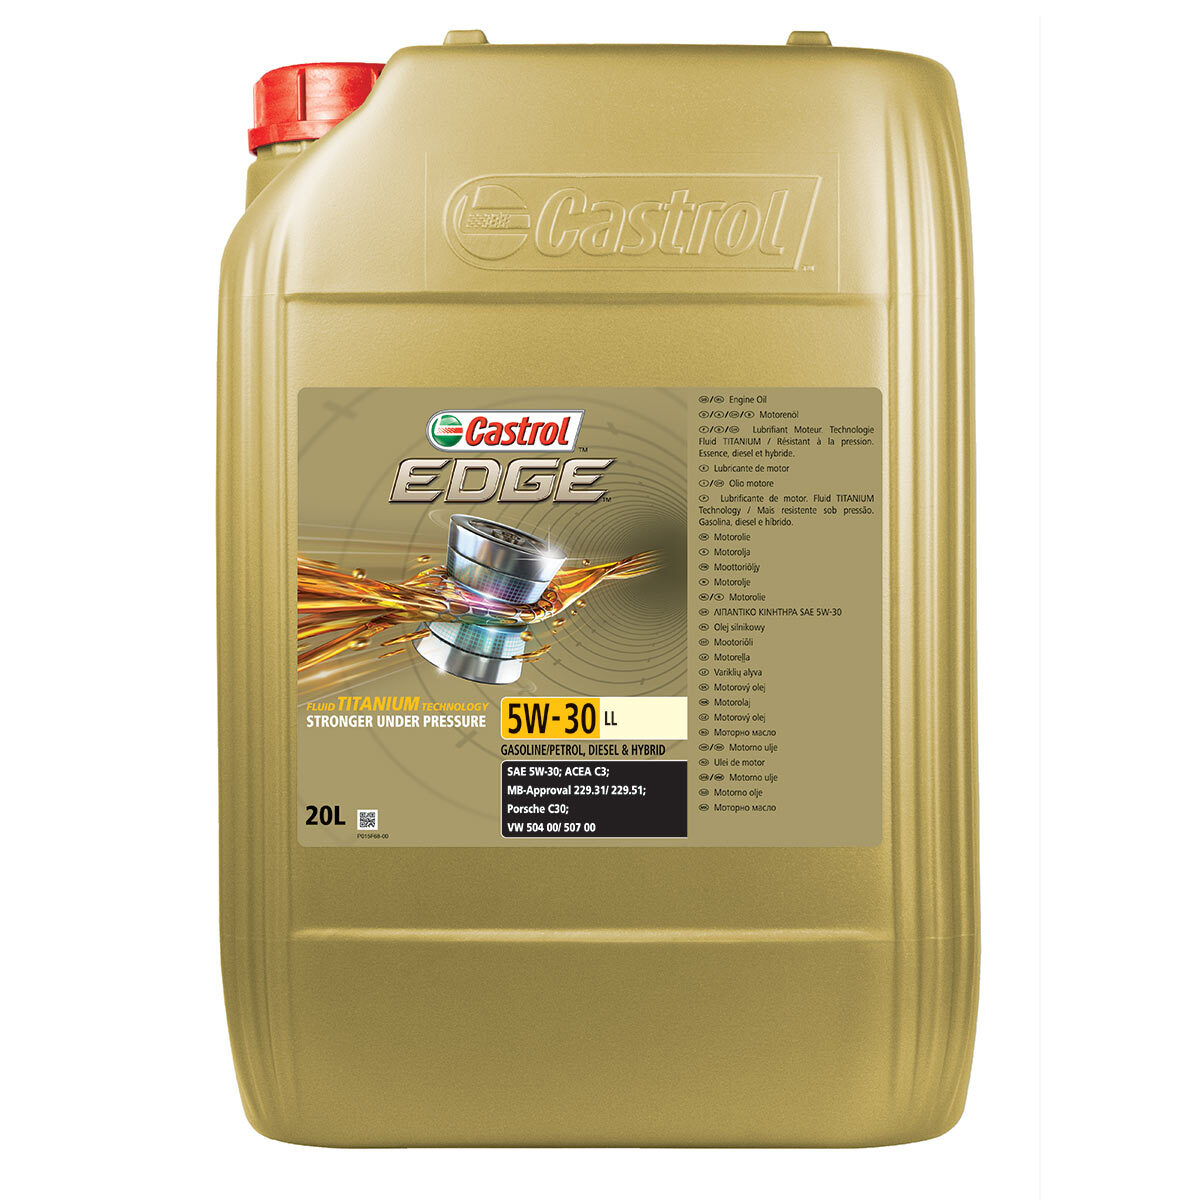 Cut out image of Castrol Oil on white background